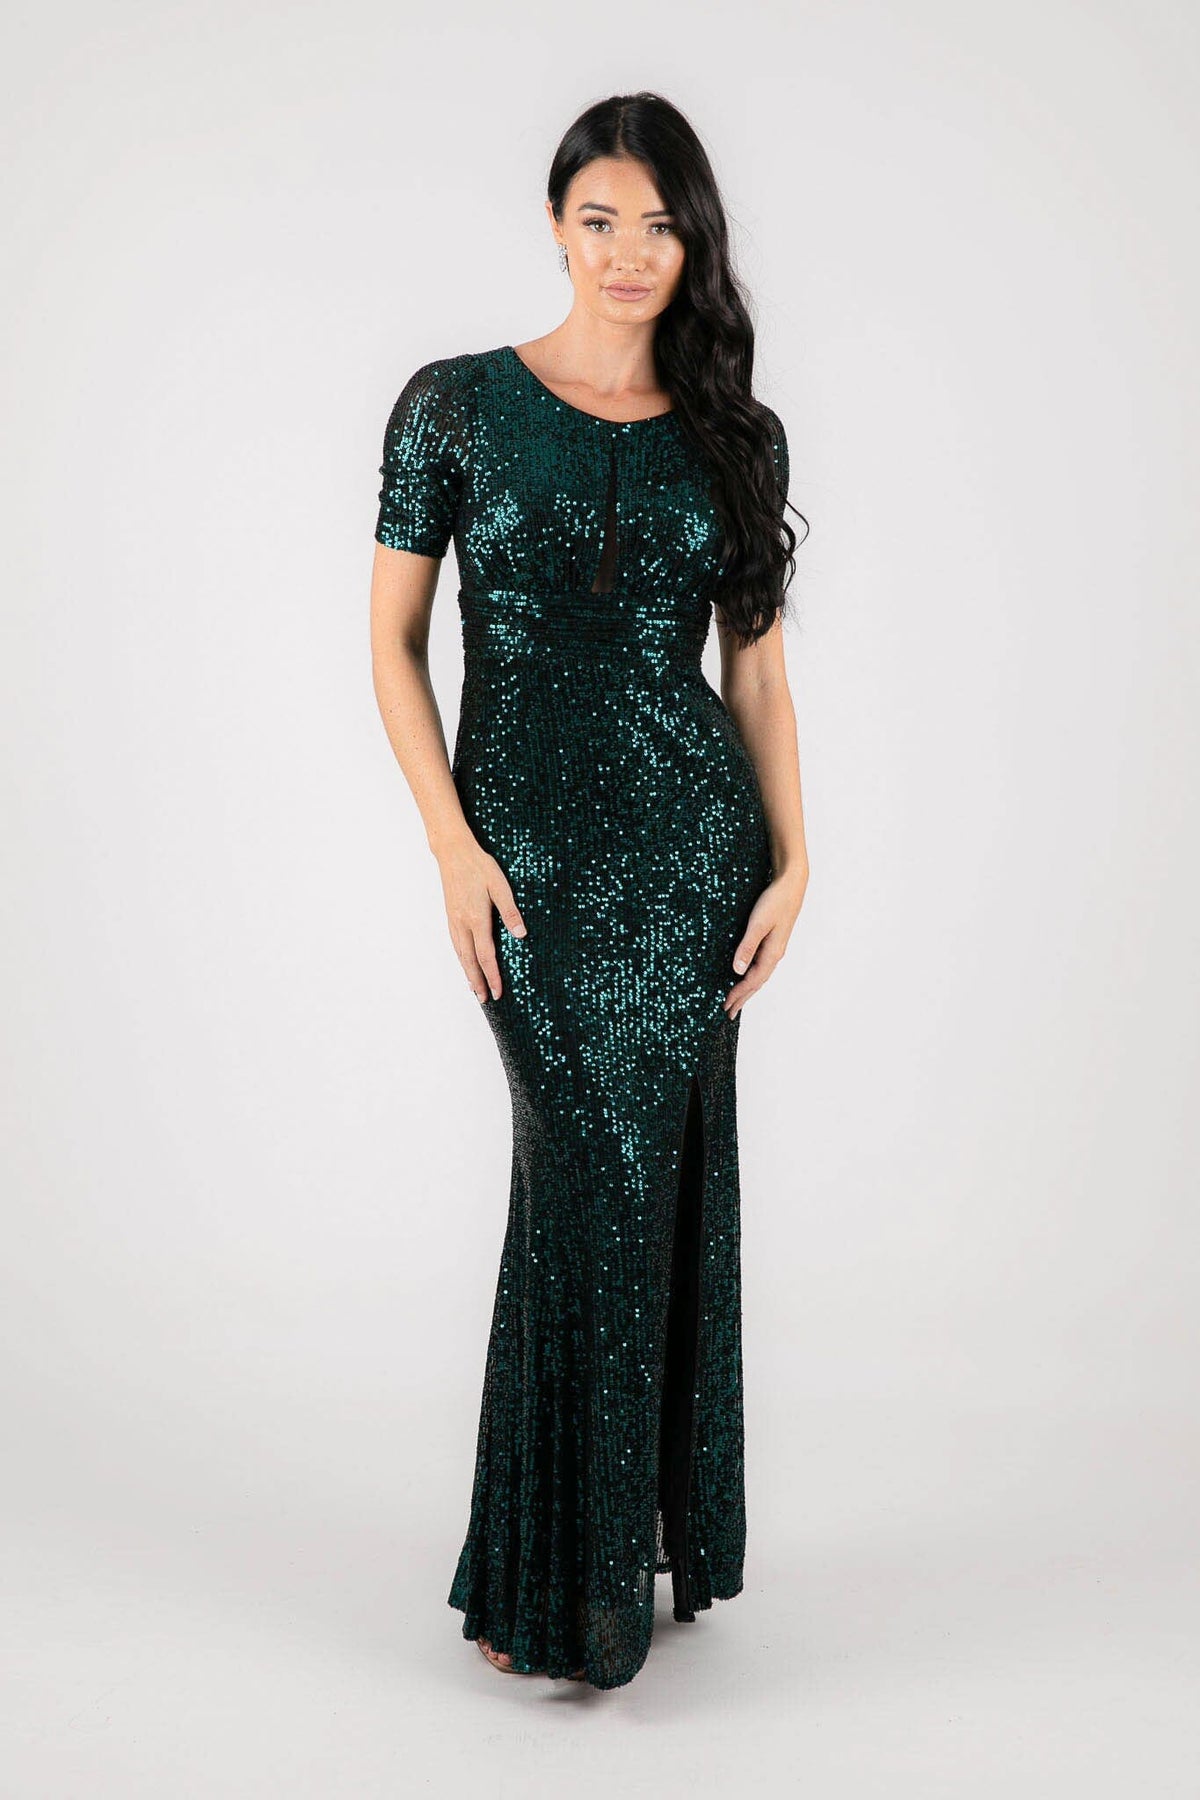 Modest Emerald Green Sequin Evening Maxi Dress with Round Neckline, Fitted Short Sleeves and Side Slit